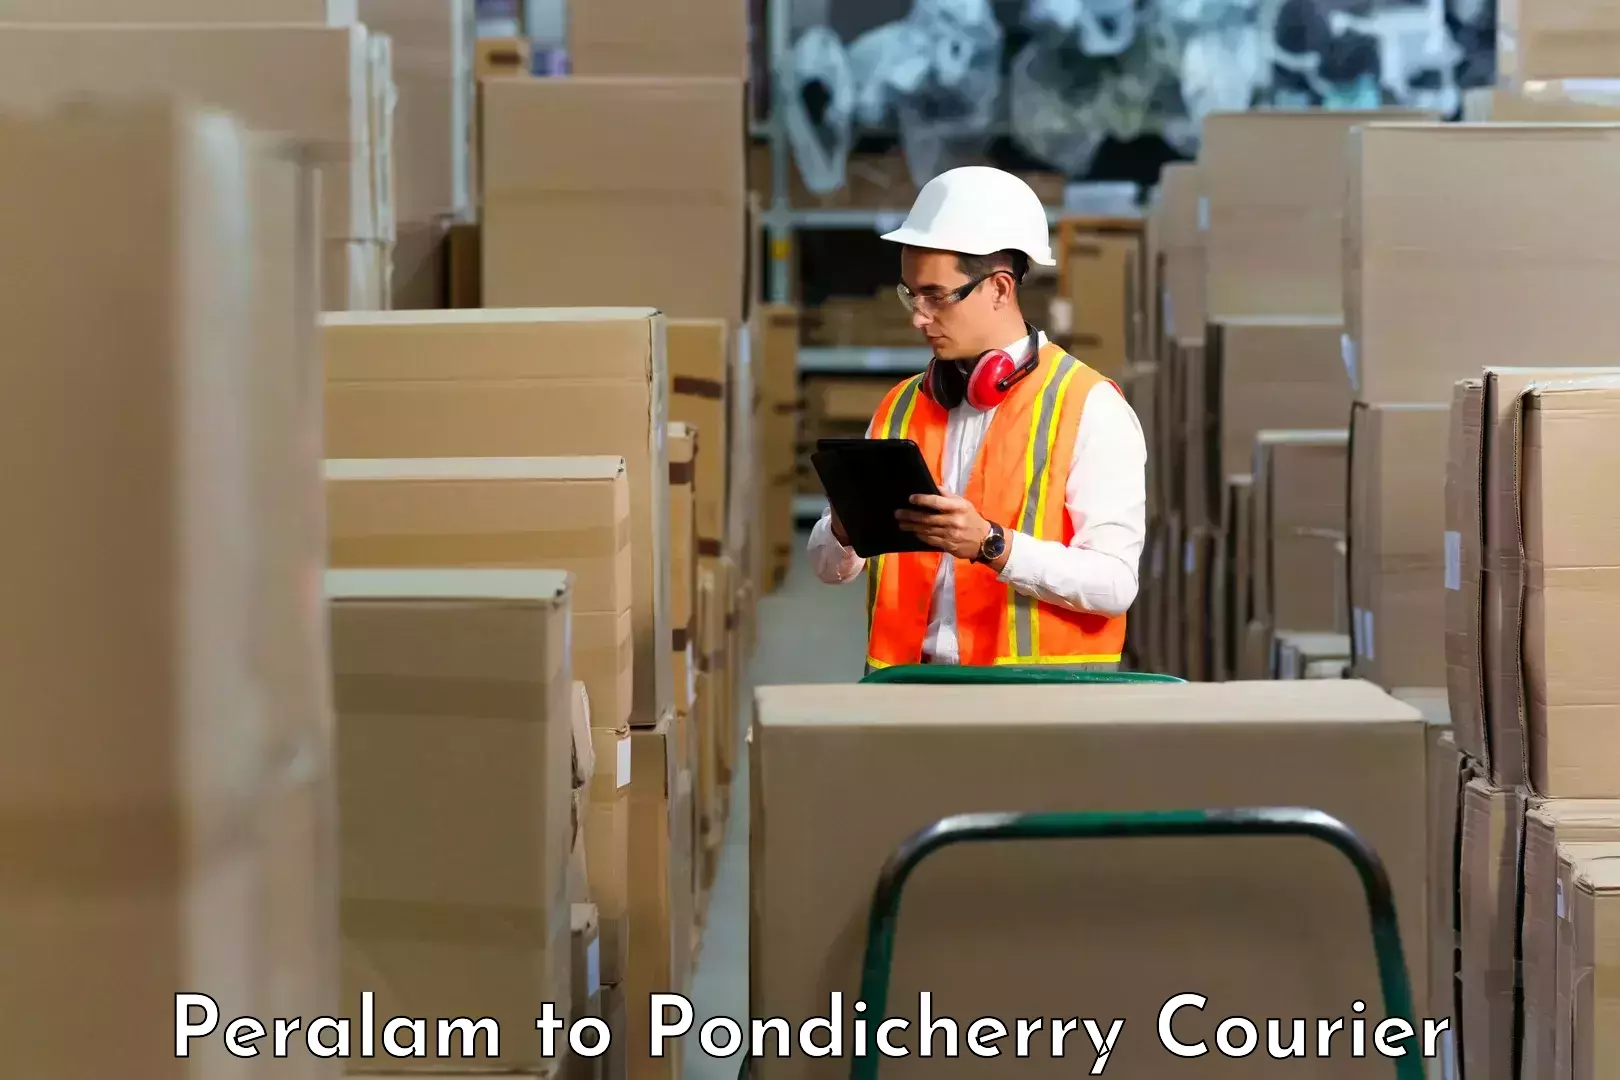 State-of-the-art courier technology Peralam to Pondicherry University